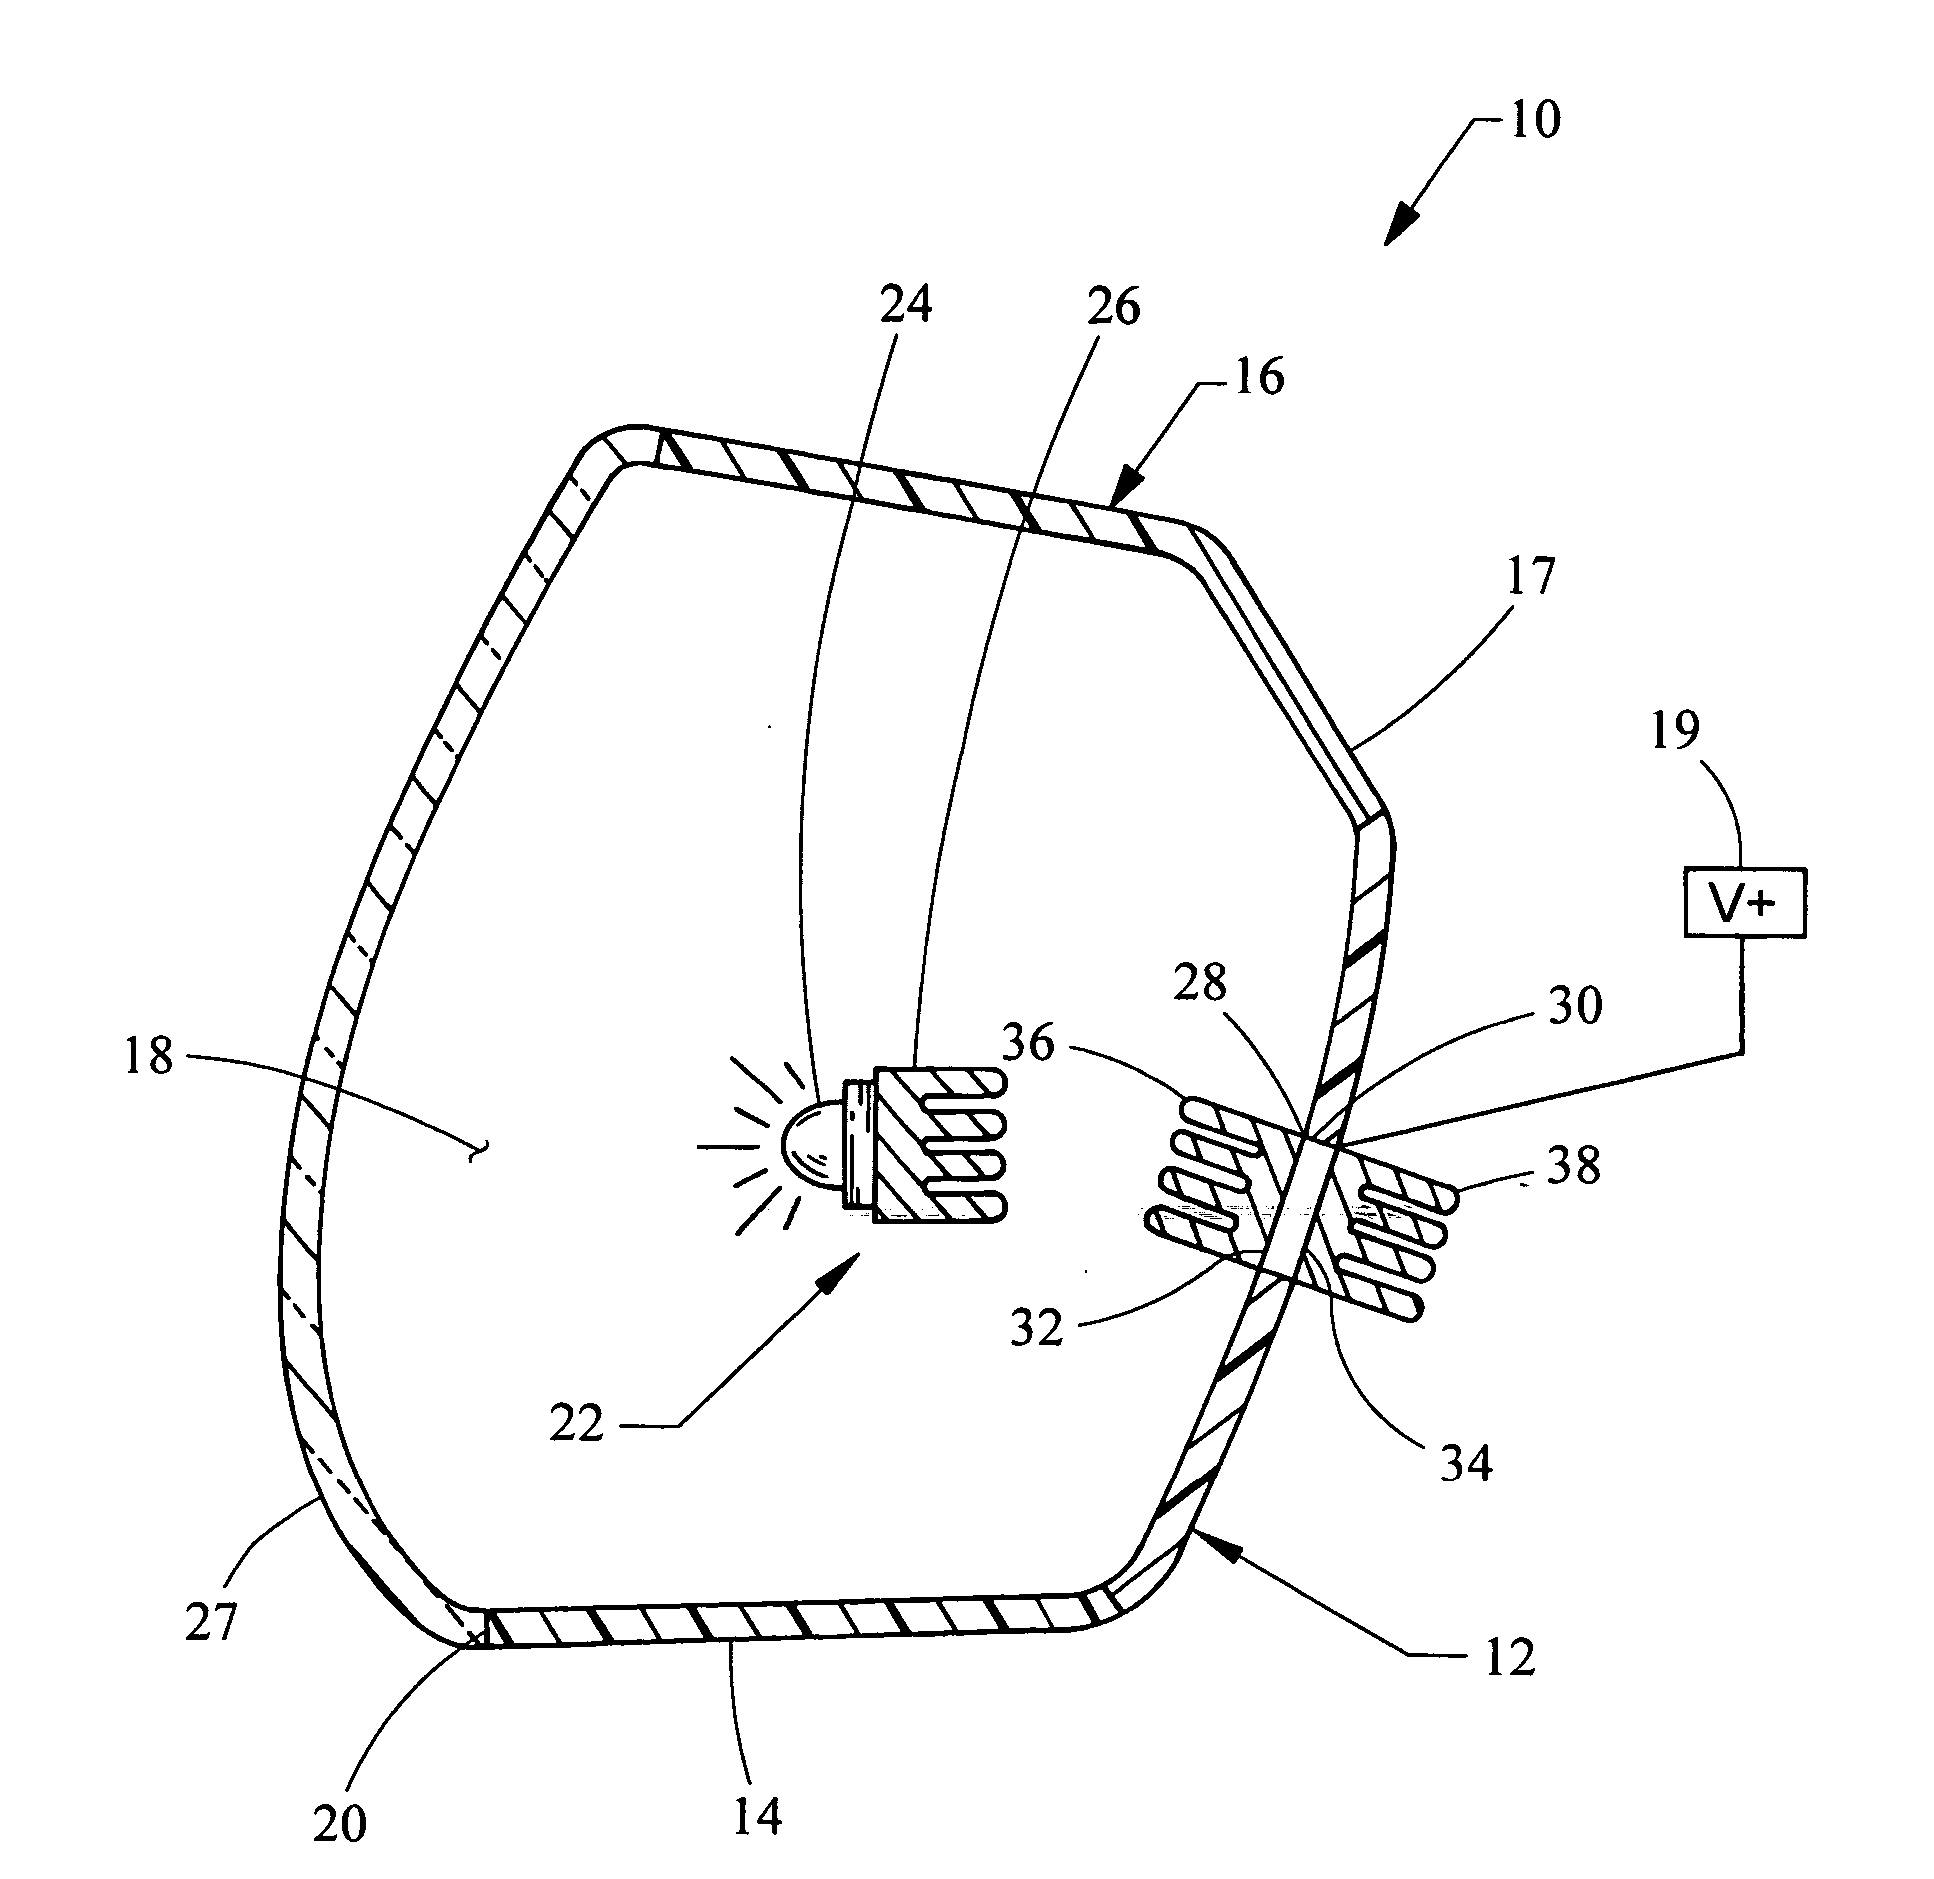 Lamp housing with interior cooling by a thermoelectric device